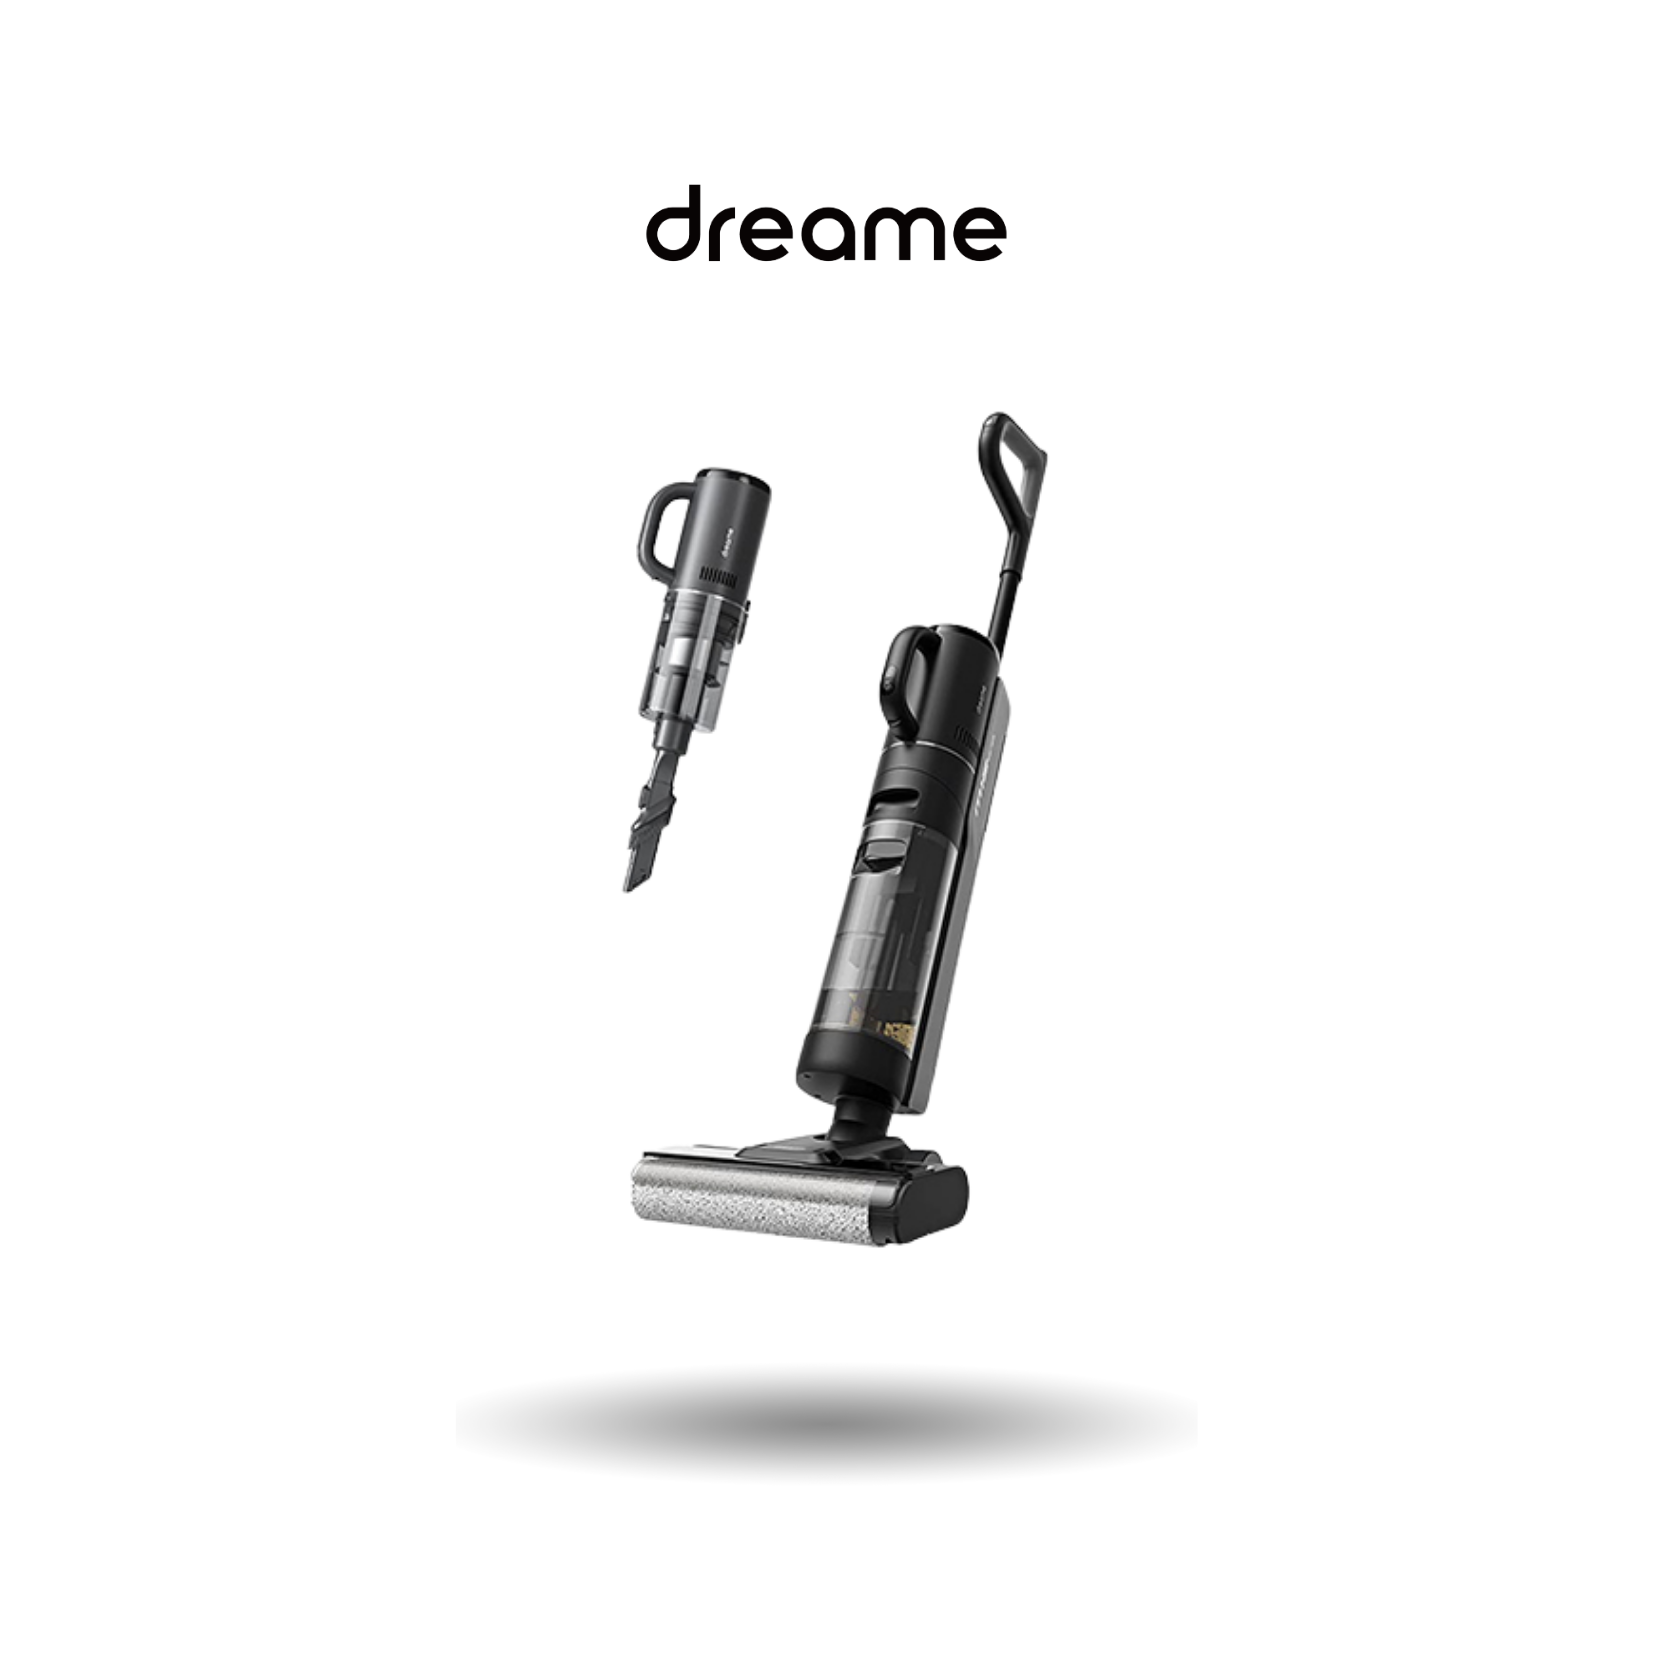 Dreame M12 Wet and Dry Vacuum Cleaner